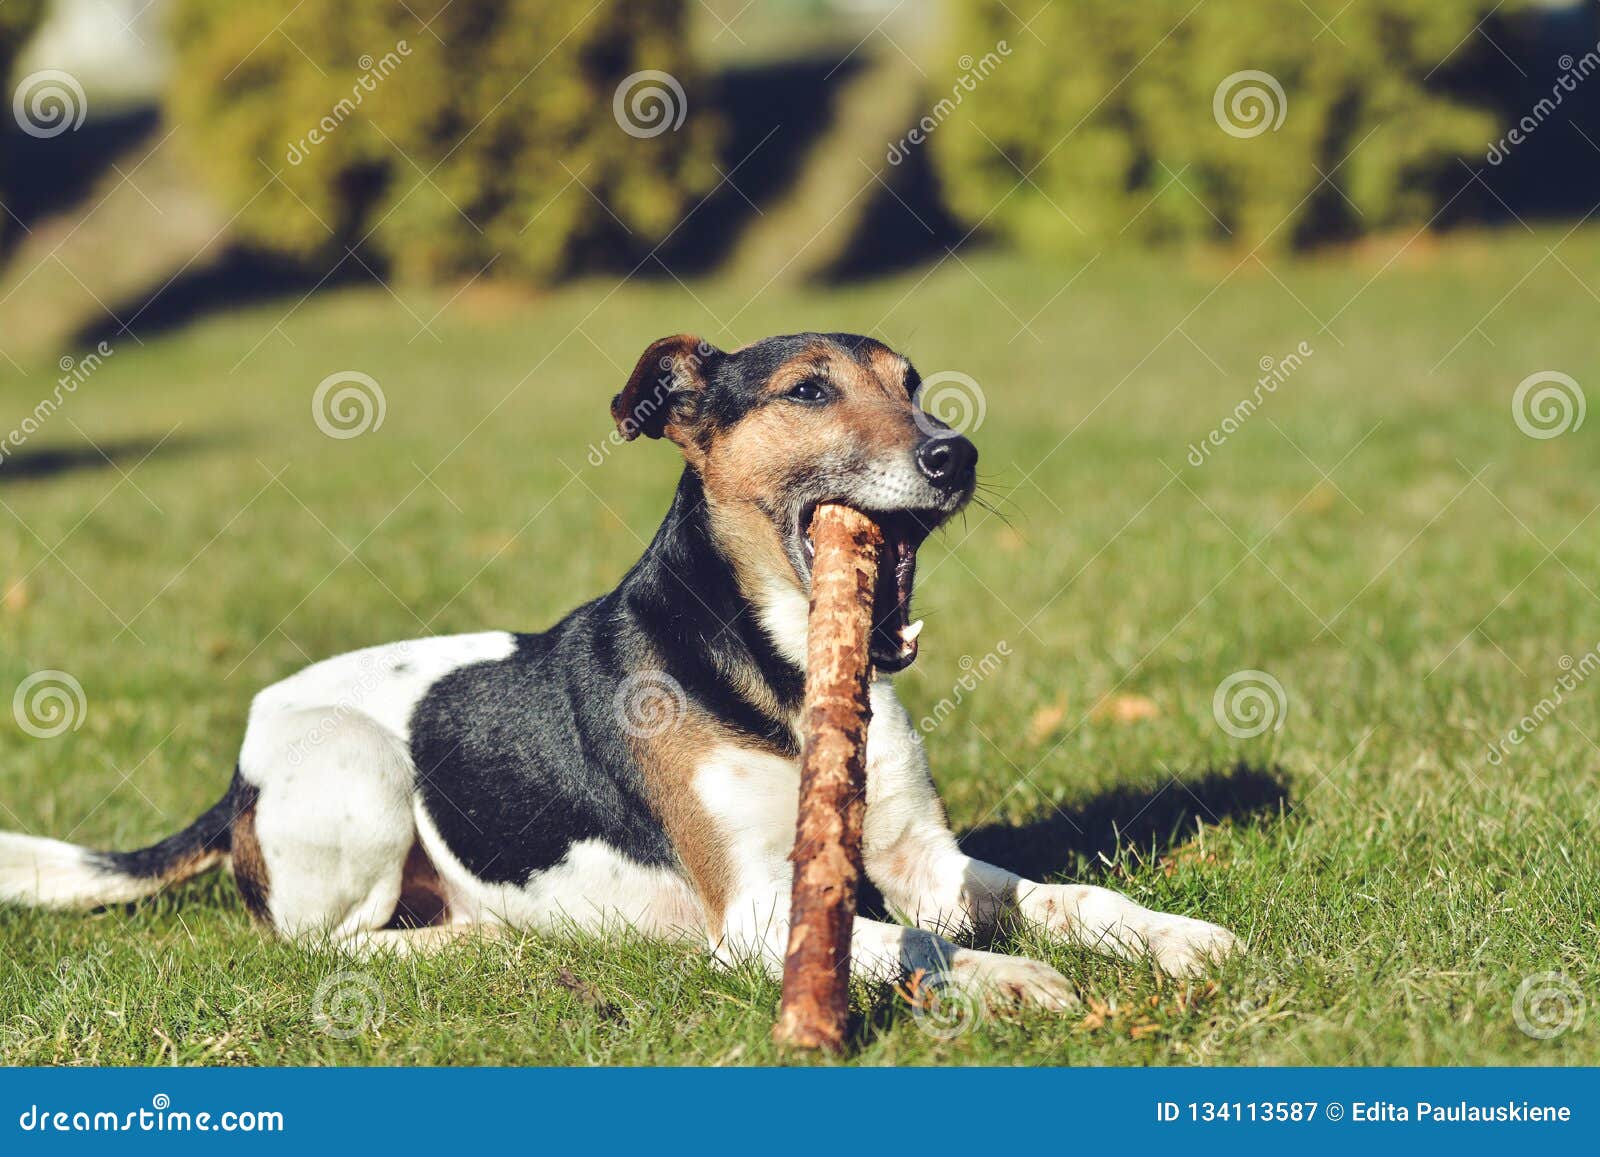 Dog S Playground Sunny And Warm Spring Day Stock Image Image Of